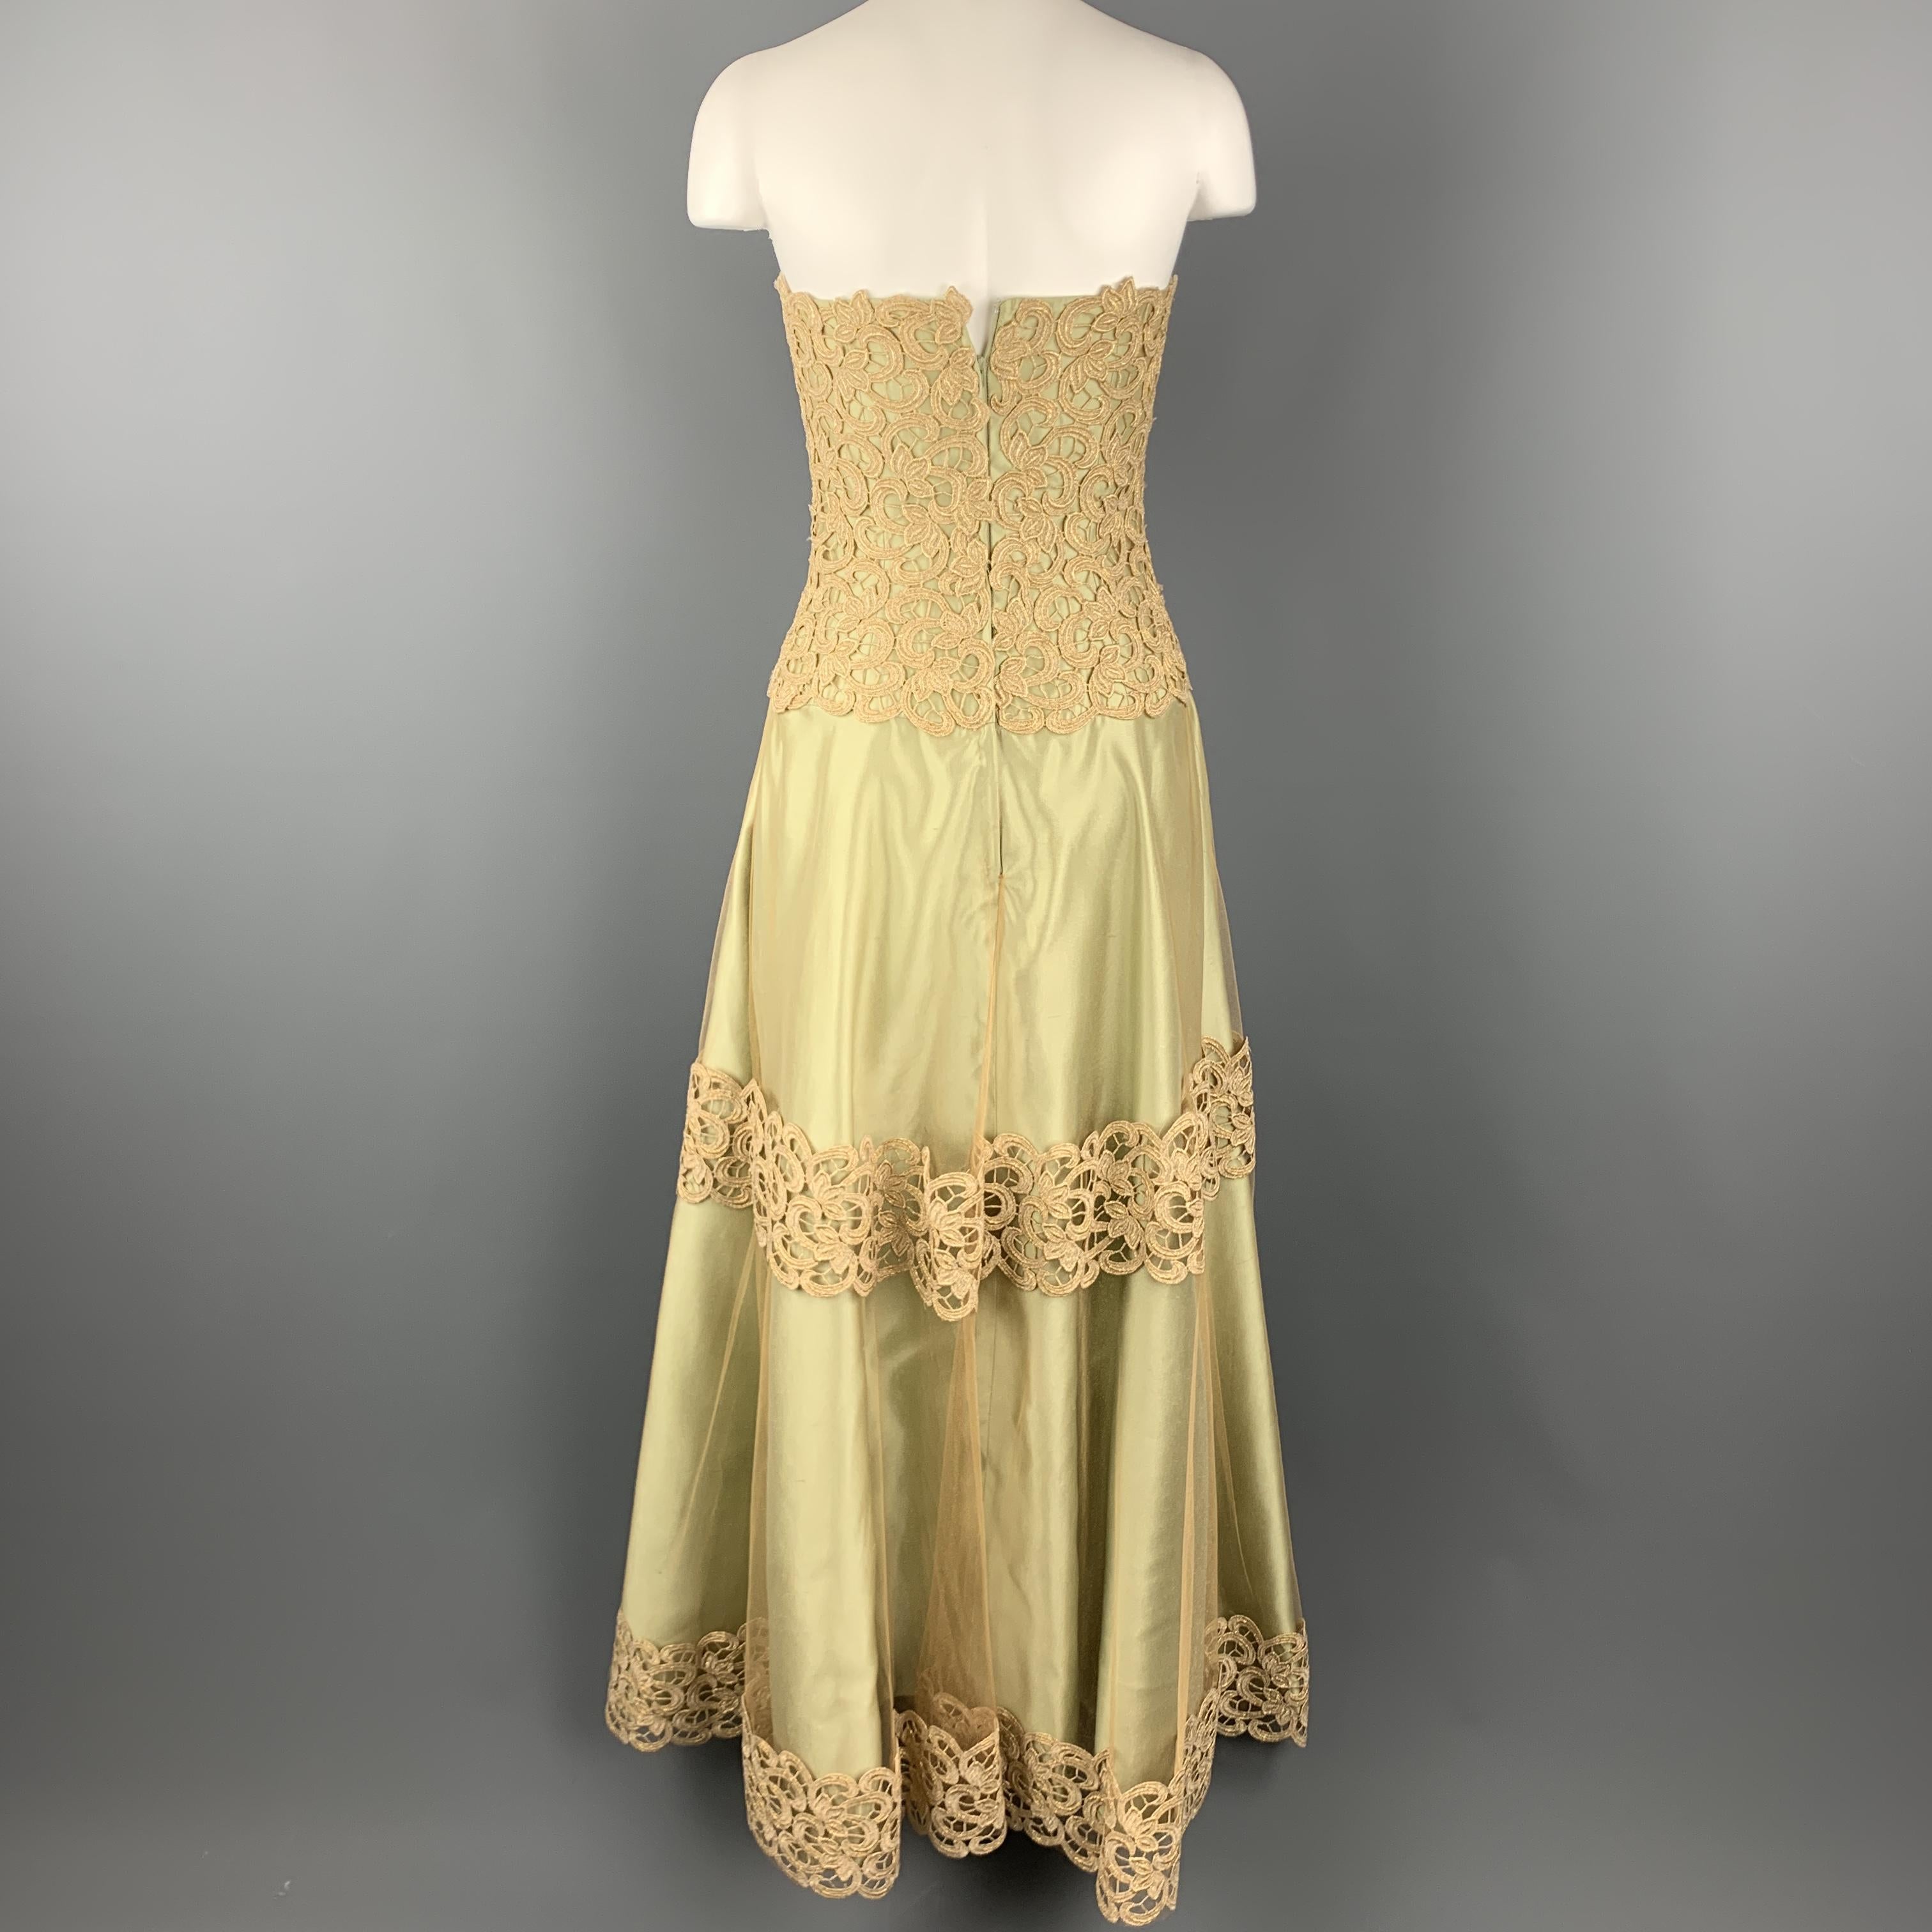 HELEN MORLEY Size 2 Light Green Tulle Overlay Gold Lace Strapless Gown 3